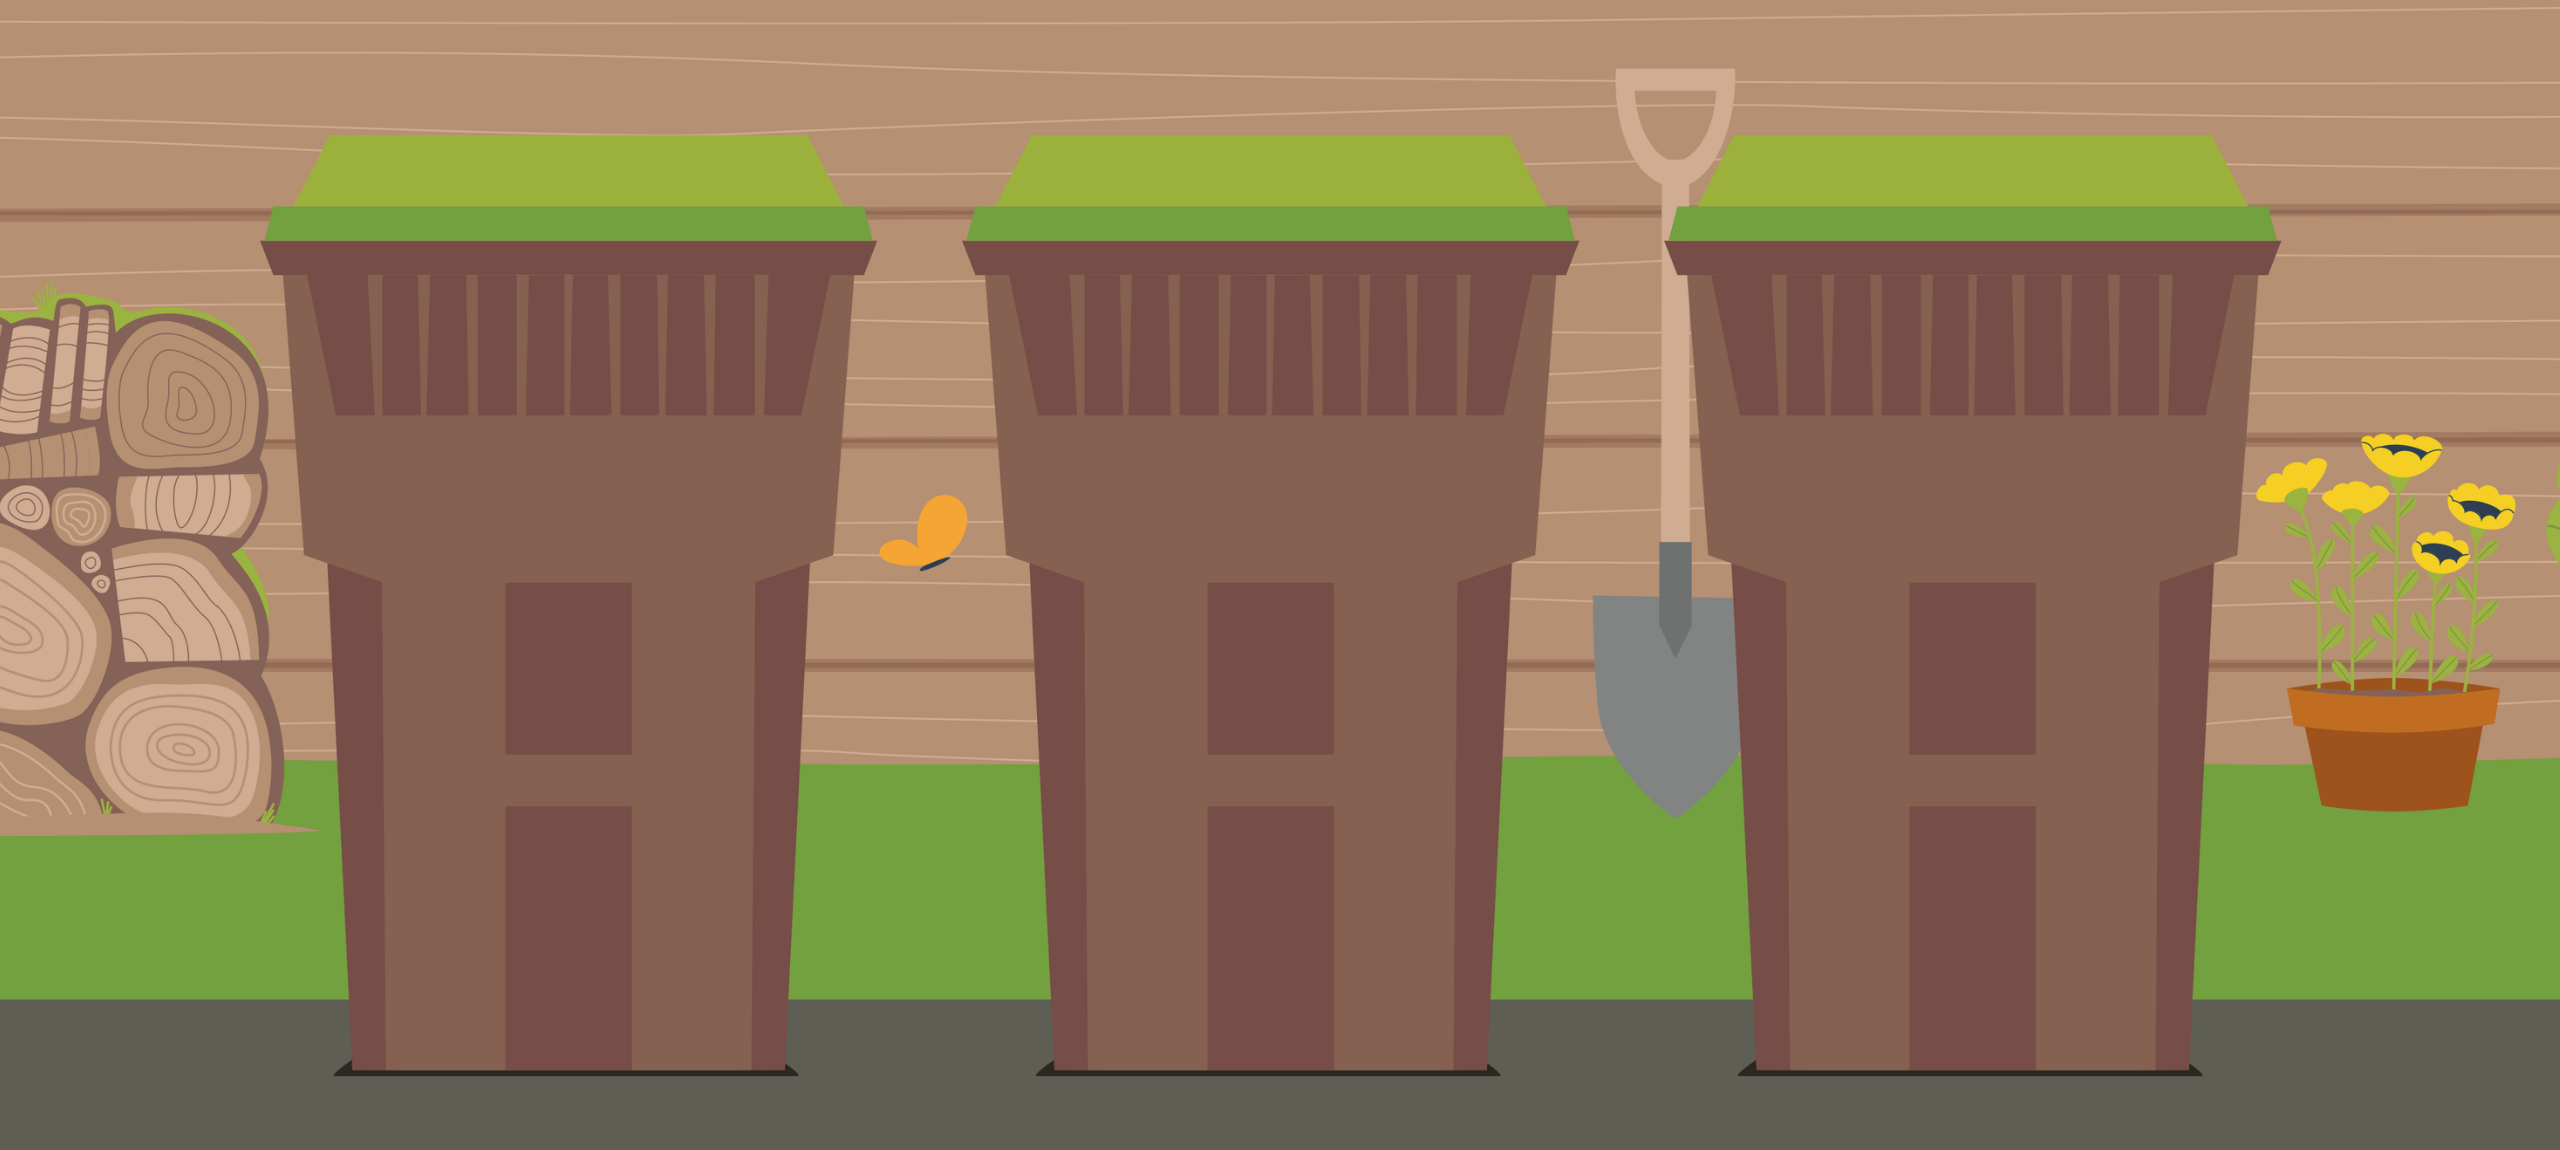 Yard waste services start in May! image